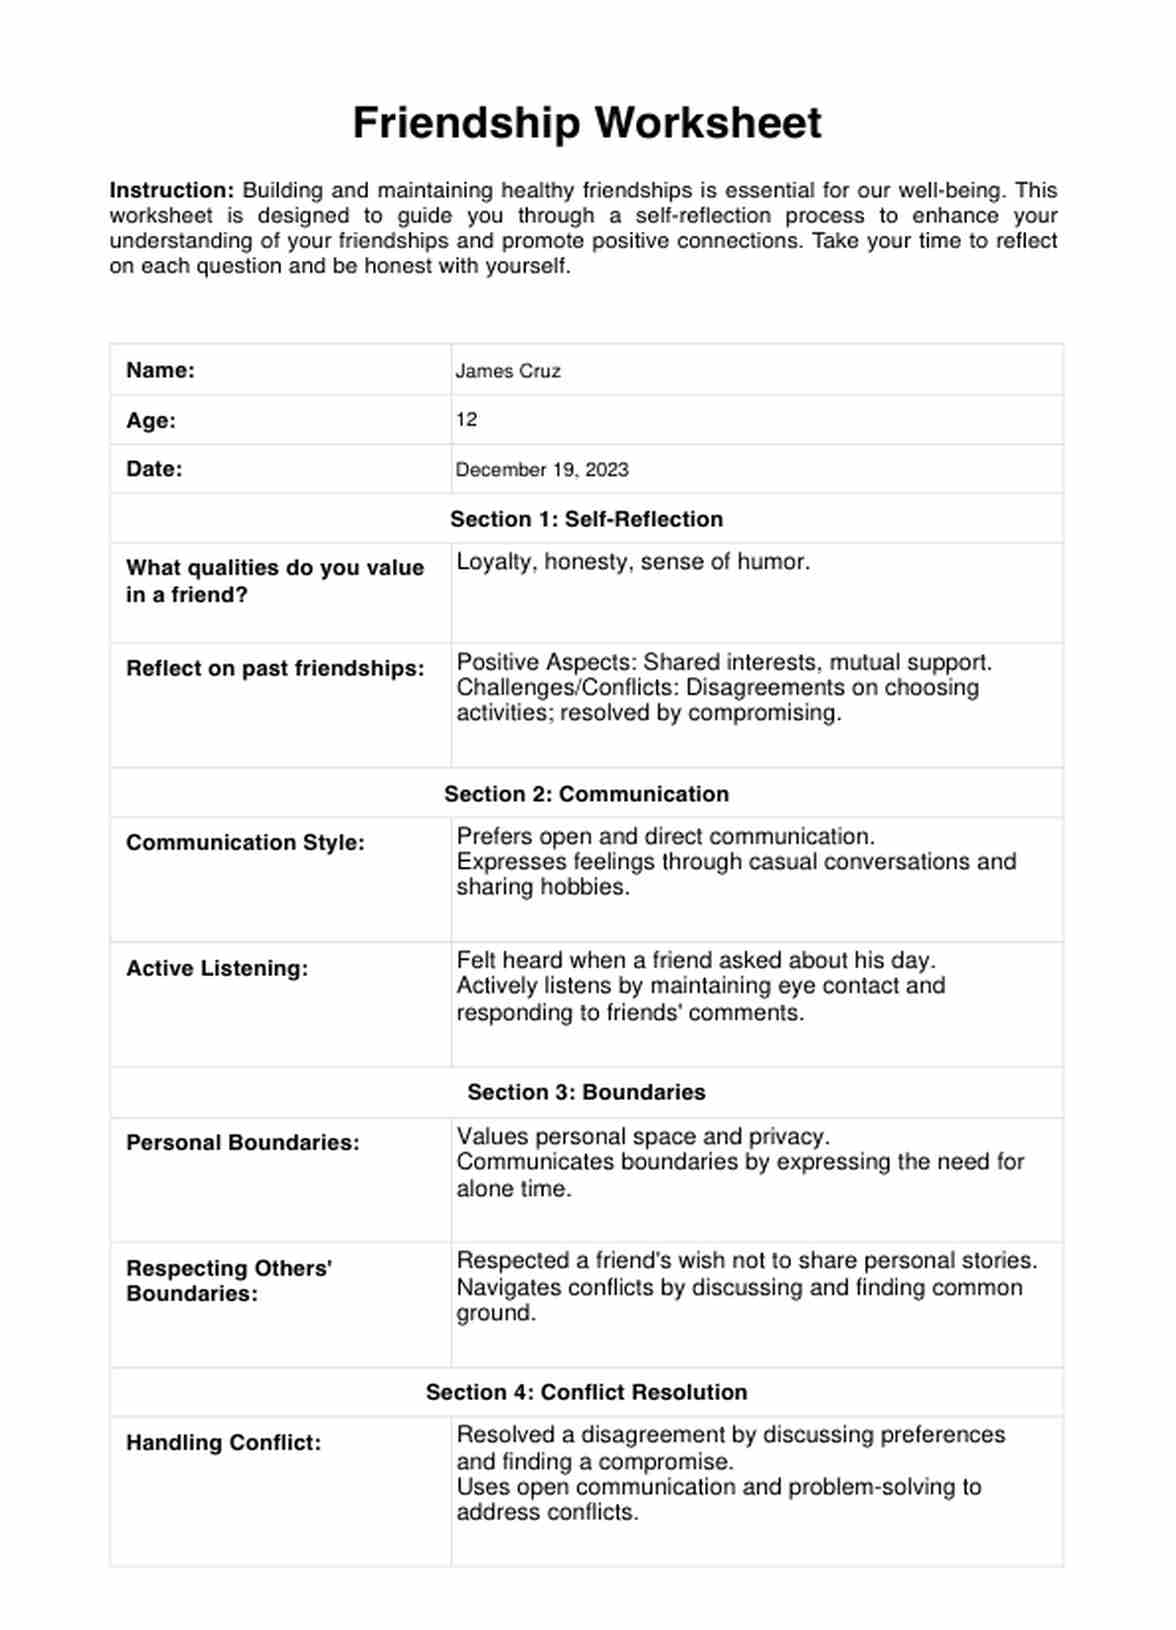 Friendship Worksheets PDF Example